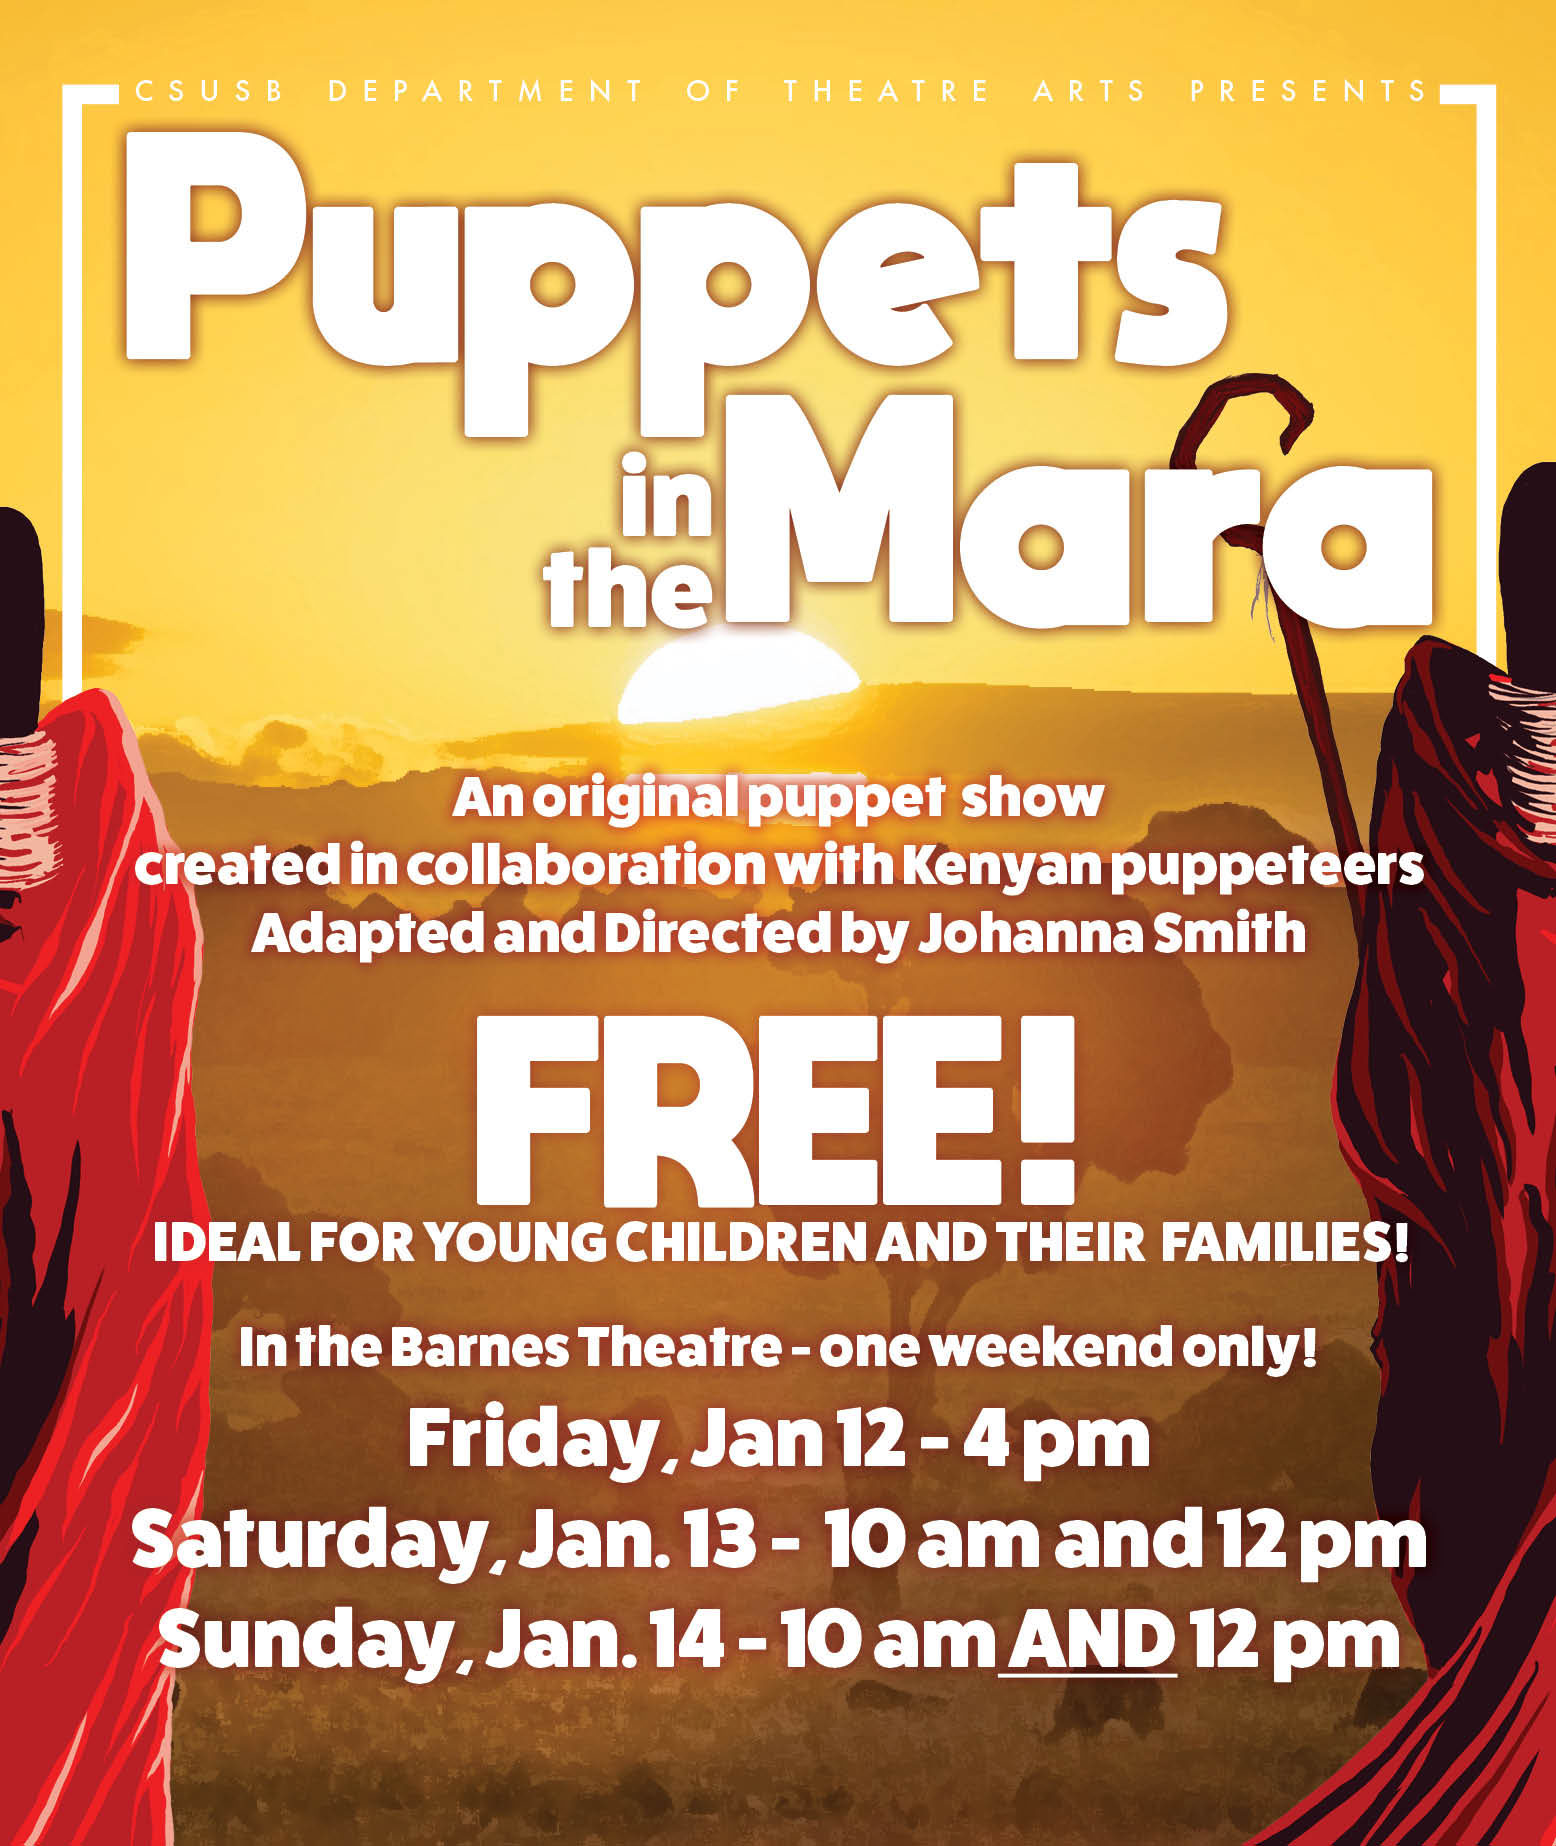 Puppets in the Mara event flyer